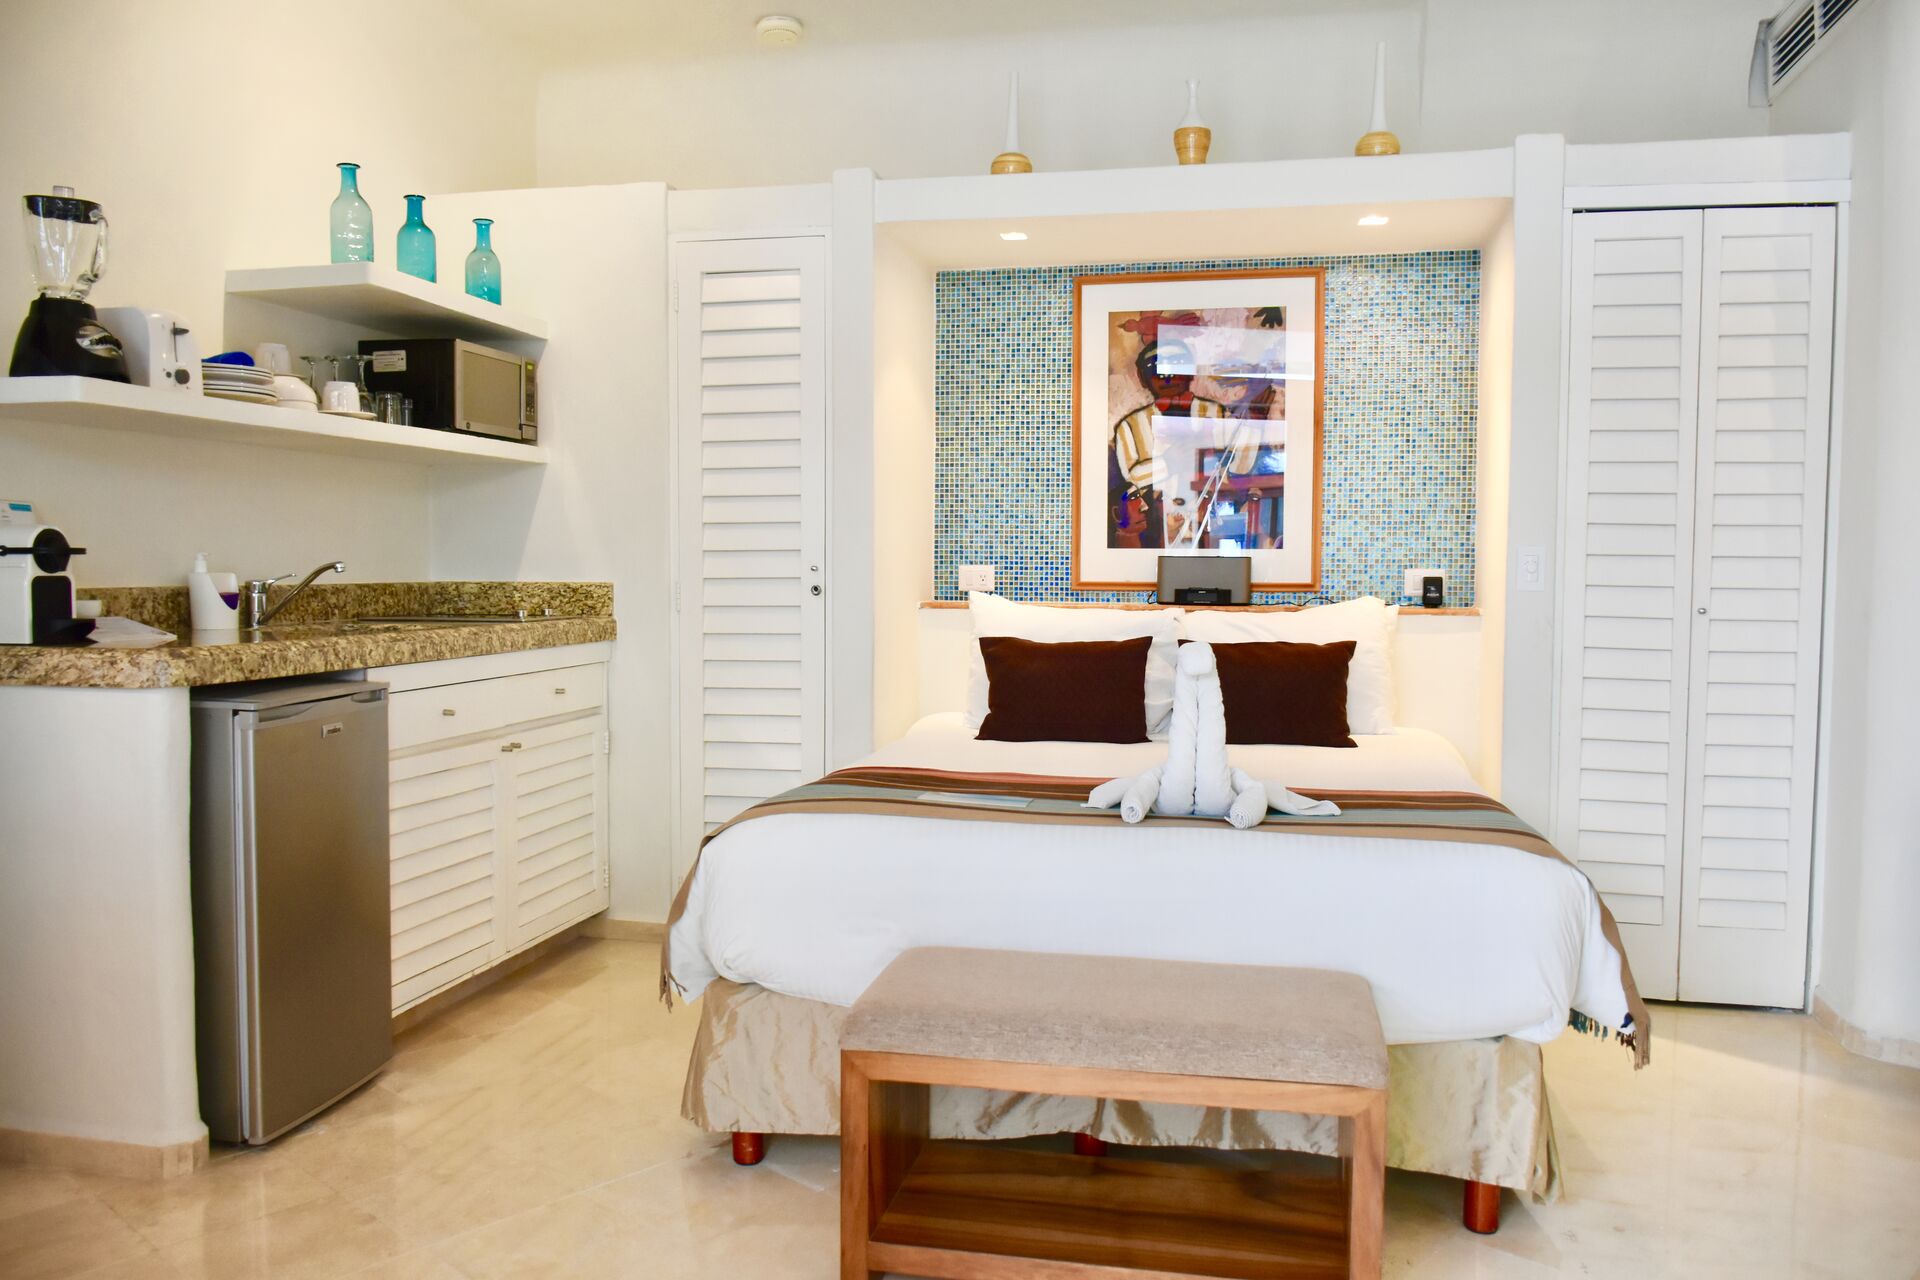 Amazing ocean view studio with queen size bed and kitchenette.